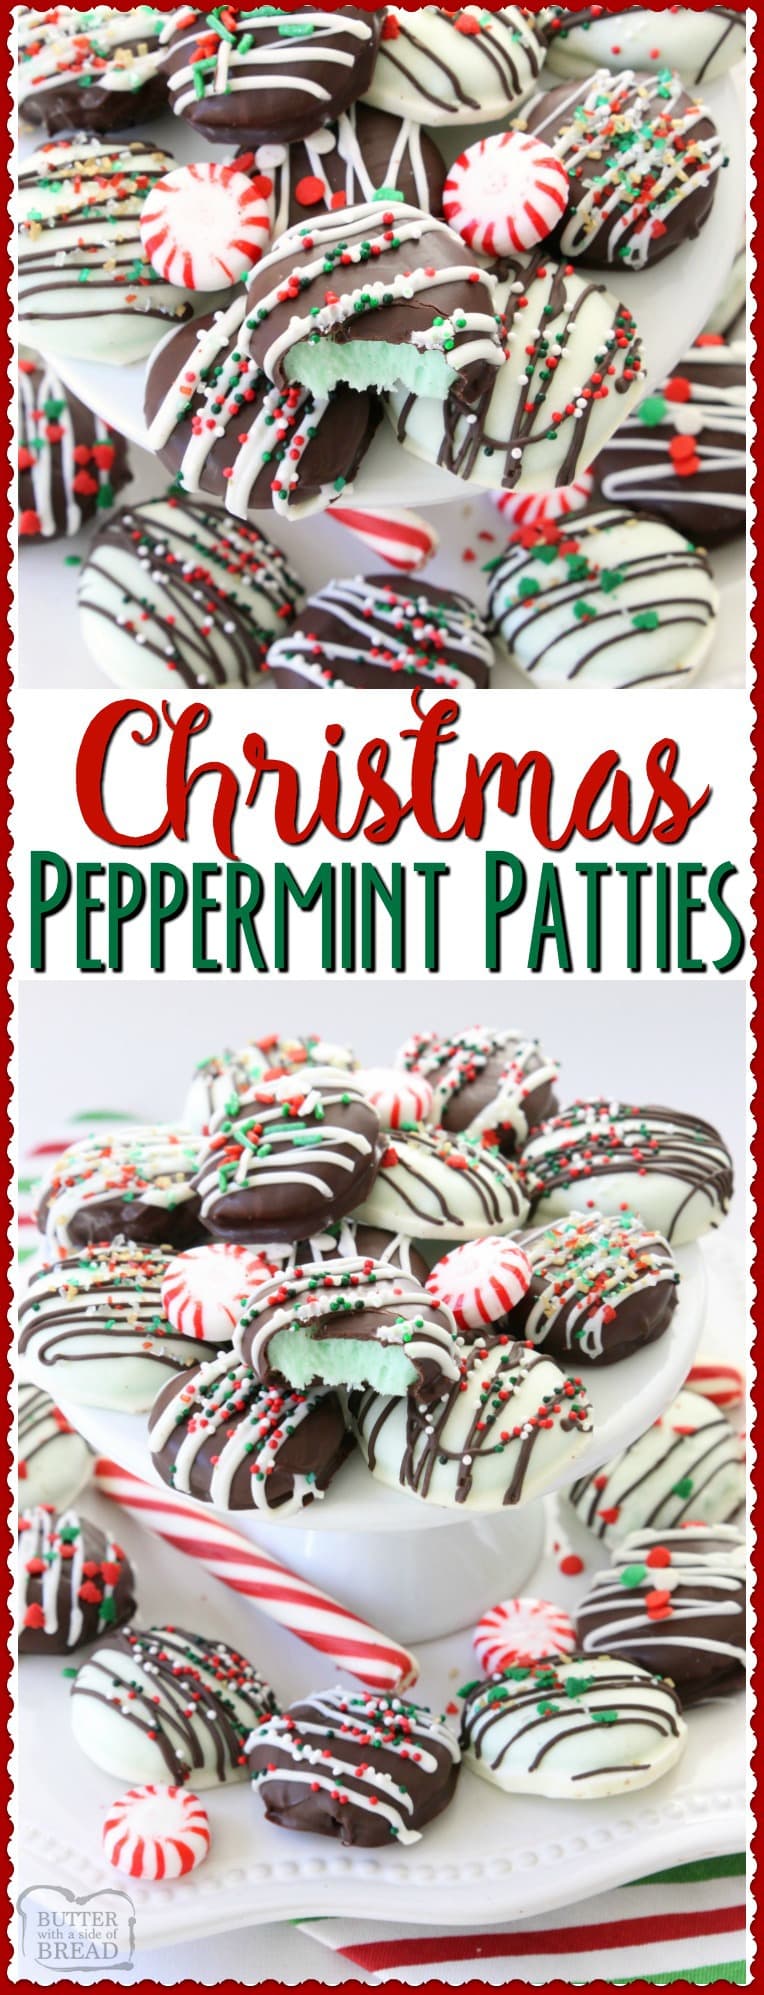 Christmas Peppermint Patties made easy with few ingredients! Perfect fun & festive dessert for holiday parties & gifts. They taste so much better homemade! Easy #peppermint #candy #chocolate #Christmas #holiday #recipe from Butter With A Side of Bread